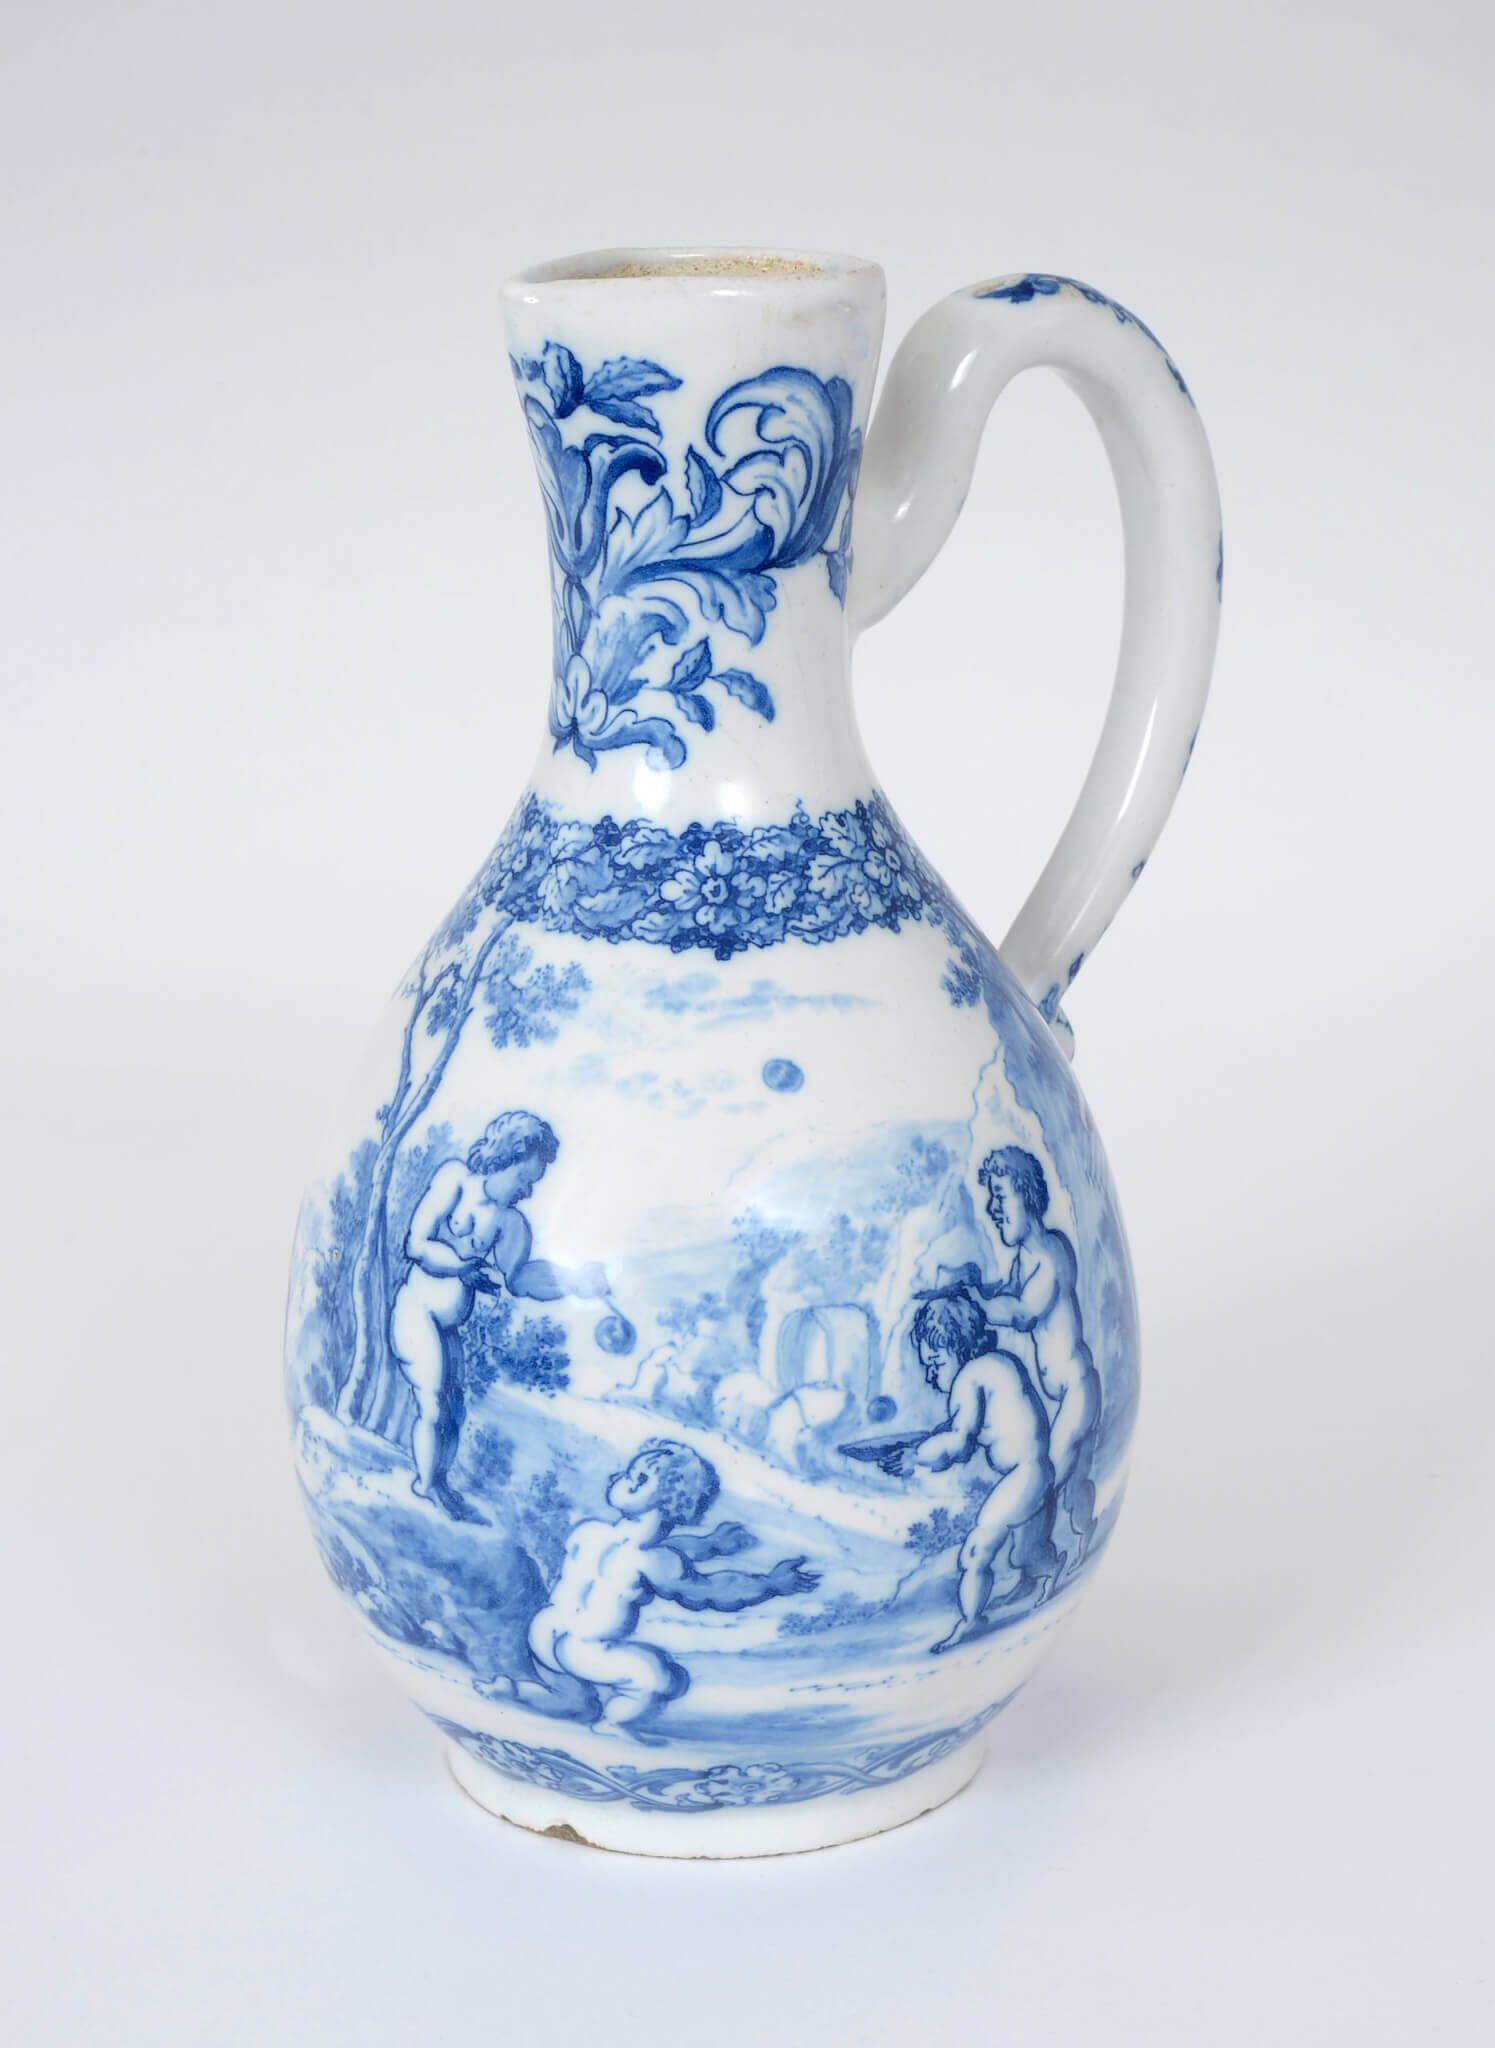 Blue and white Delftware ewer